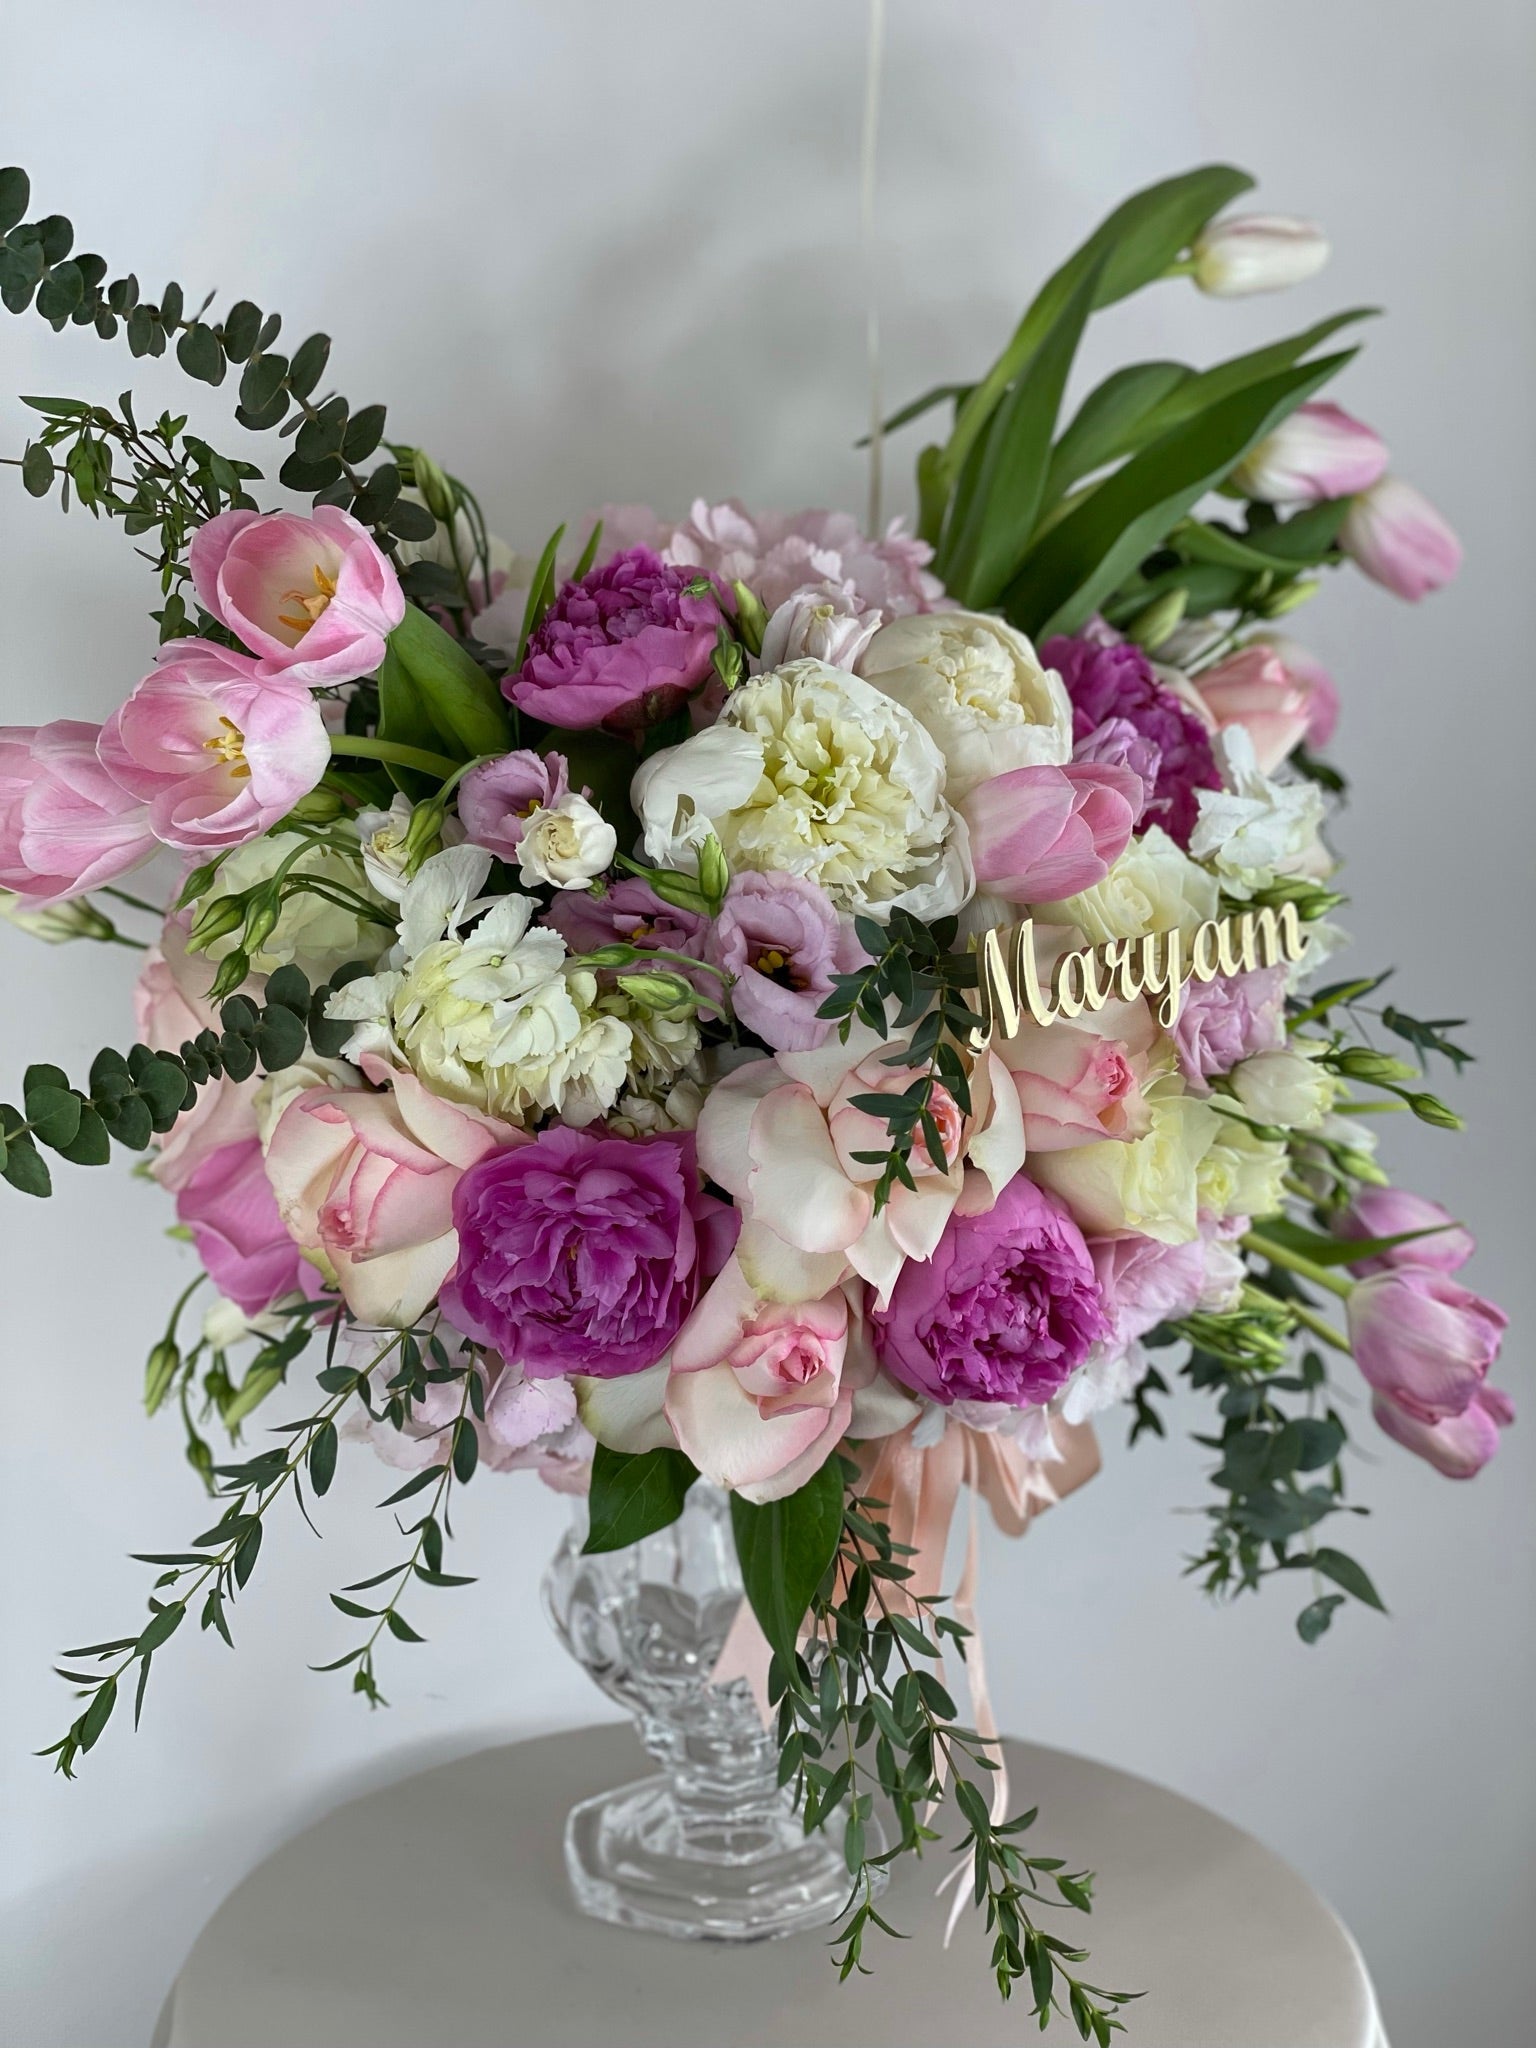 Mixed pink and white flowers in a vase with customized name